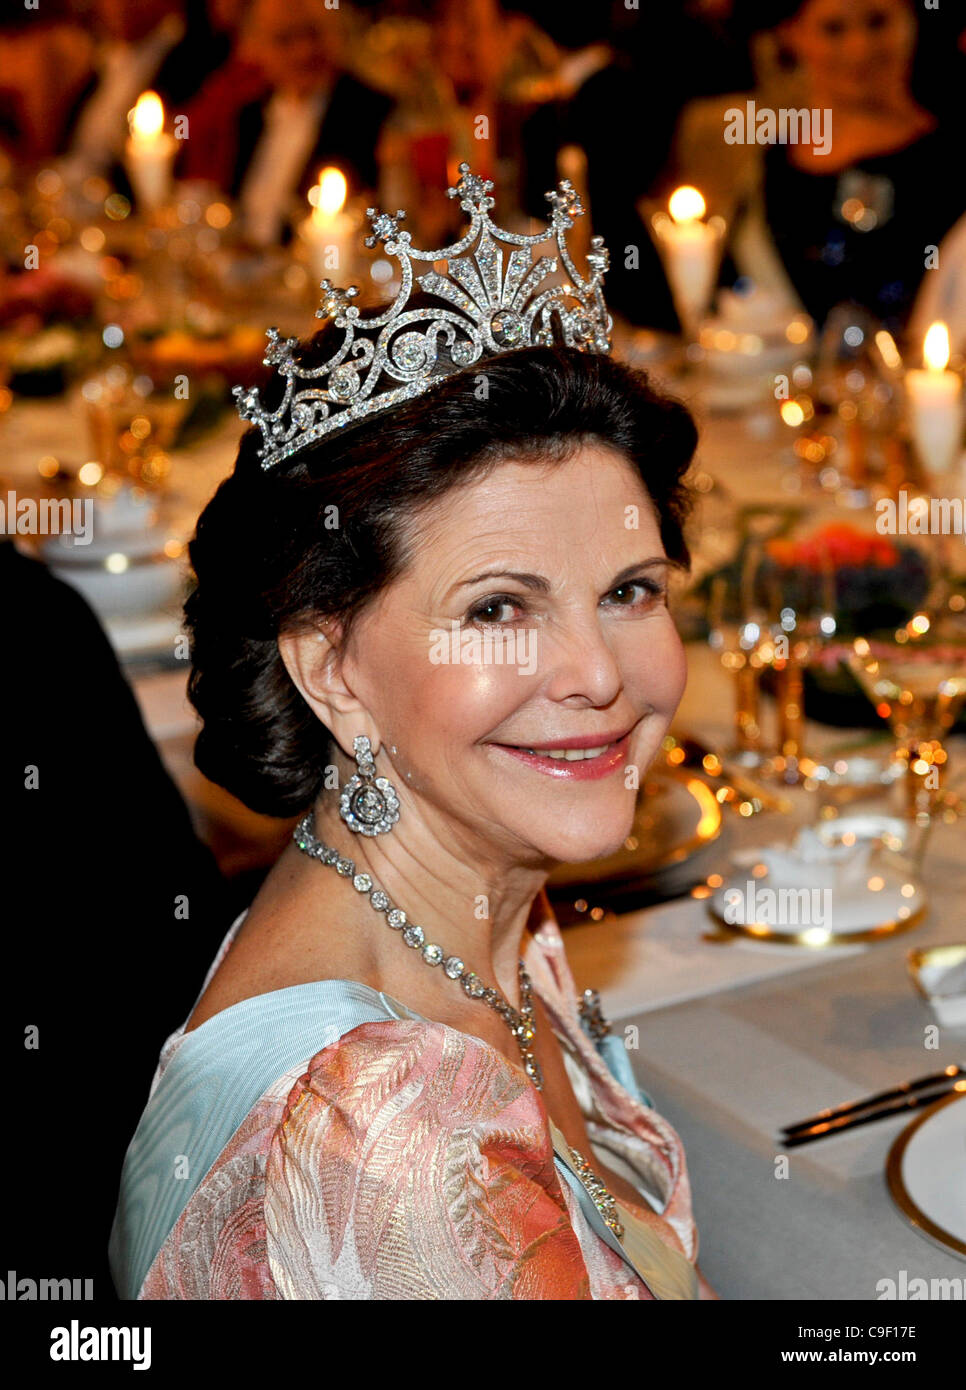 The gala dinner honoring the Nobel Prize Laureates in the Blue Hall in Stockholm City Hall on Saturday December 10th 2011. Queen Silvia of Sweden at the main table. Stock Photo